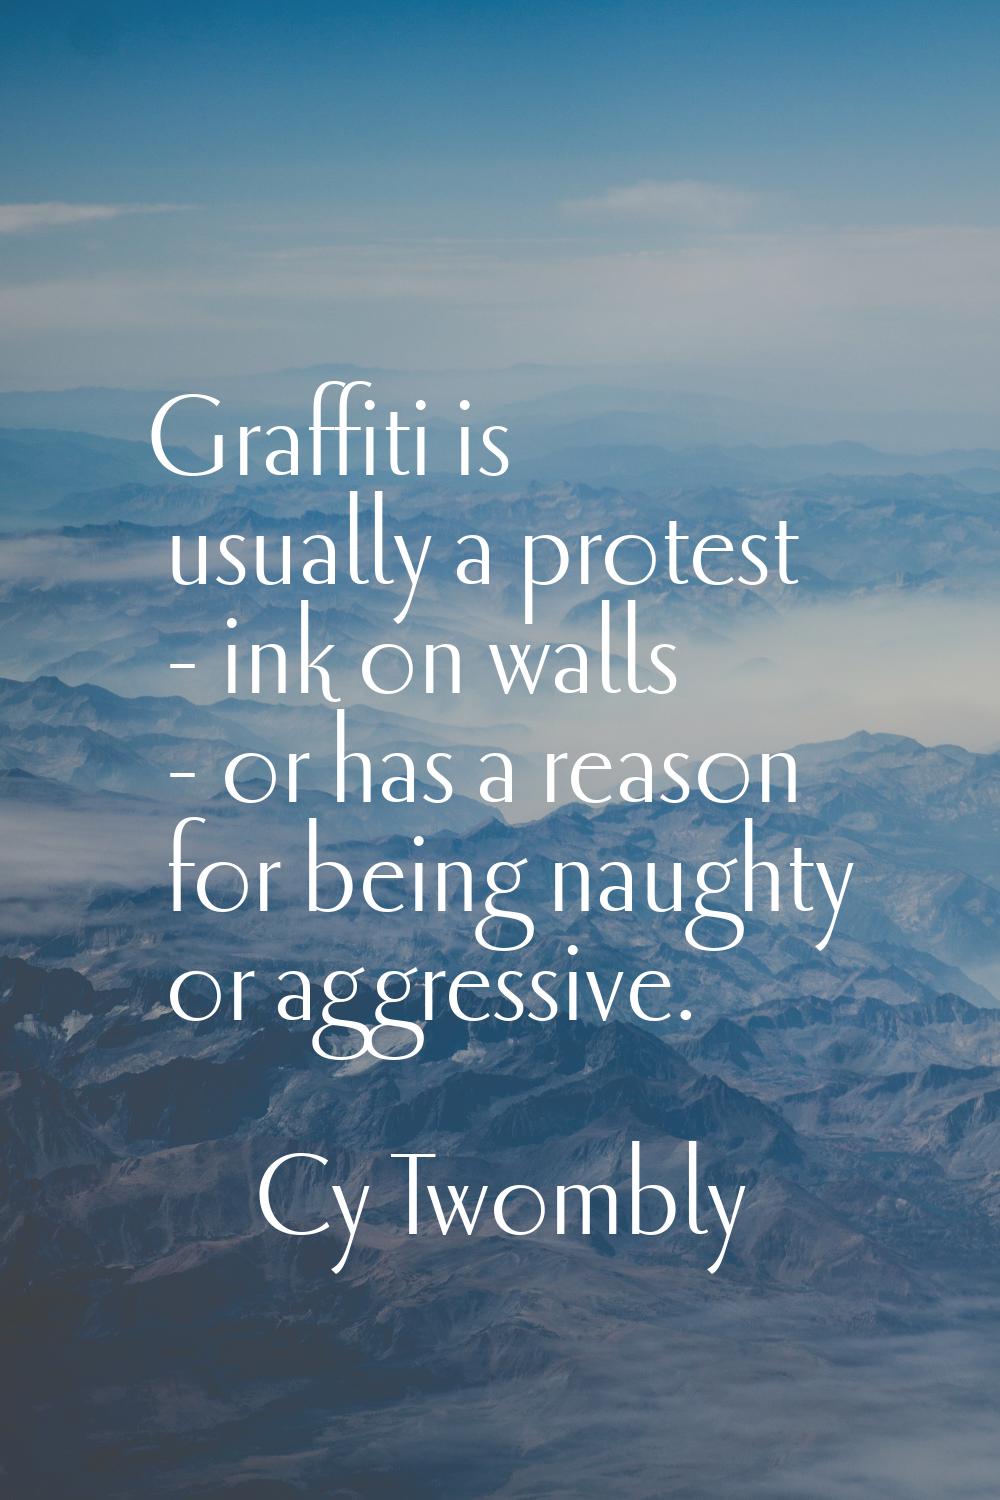 Graffiti is usually a protest - ink on walls - or has a reason for being naughty or aggressive.